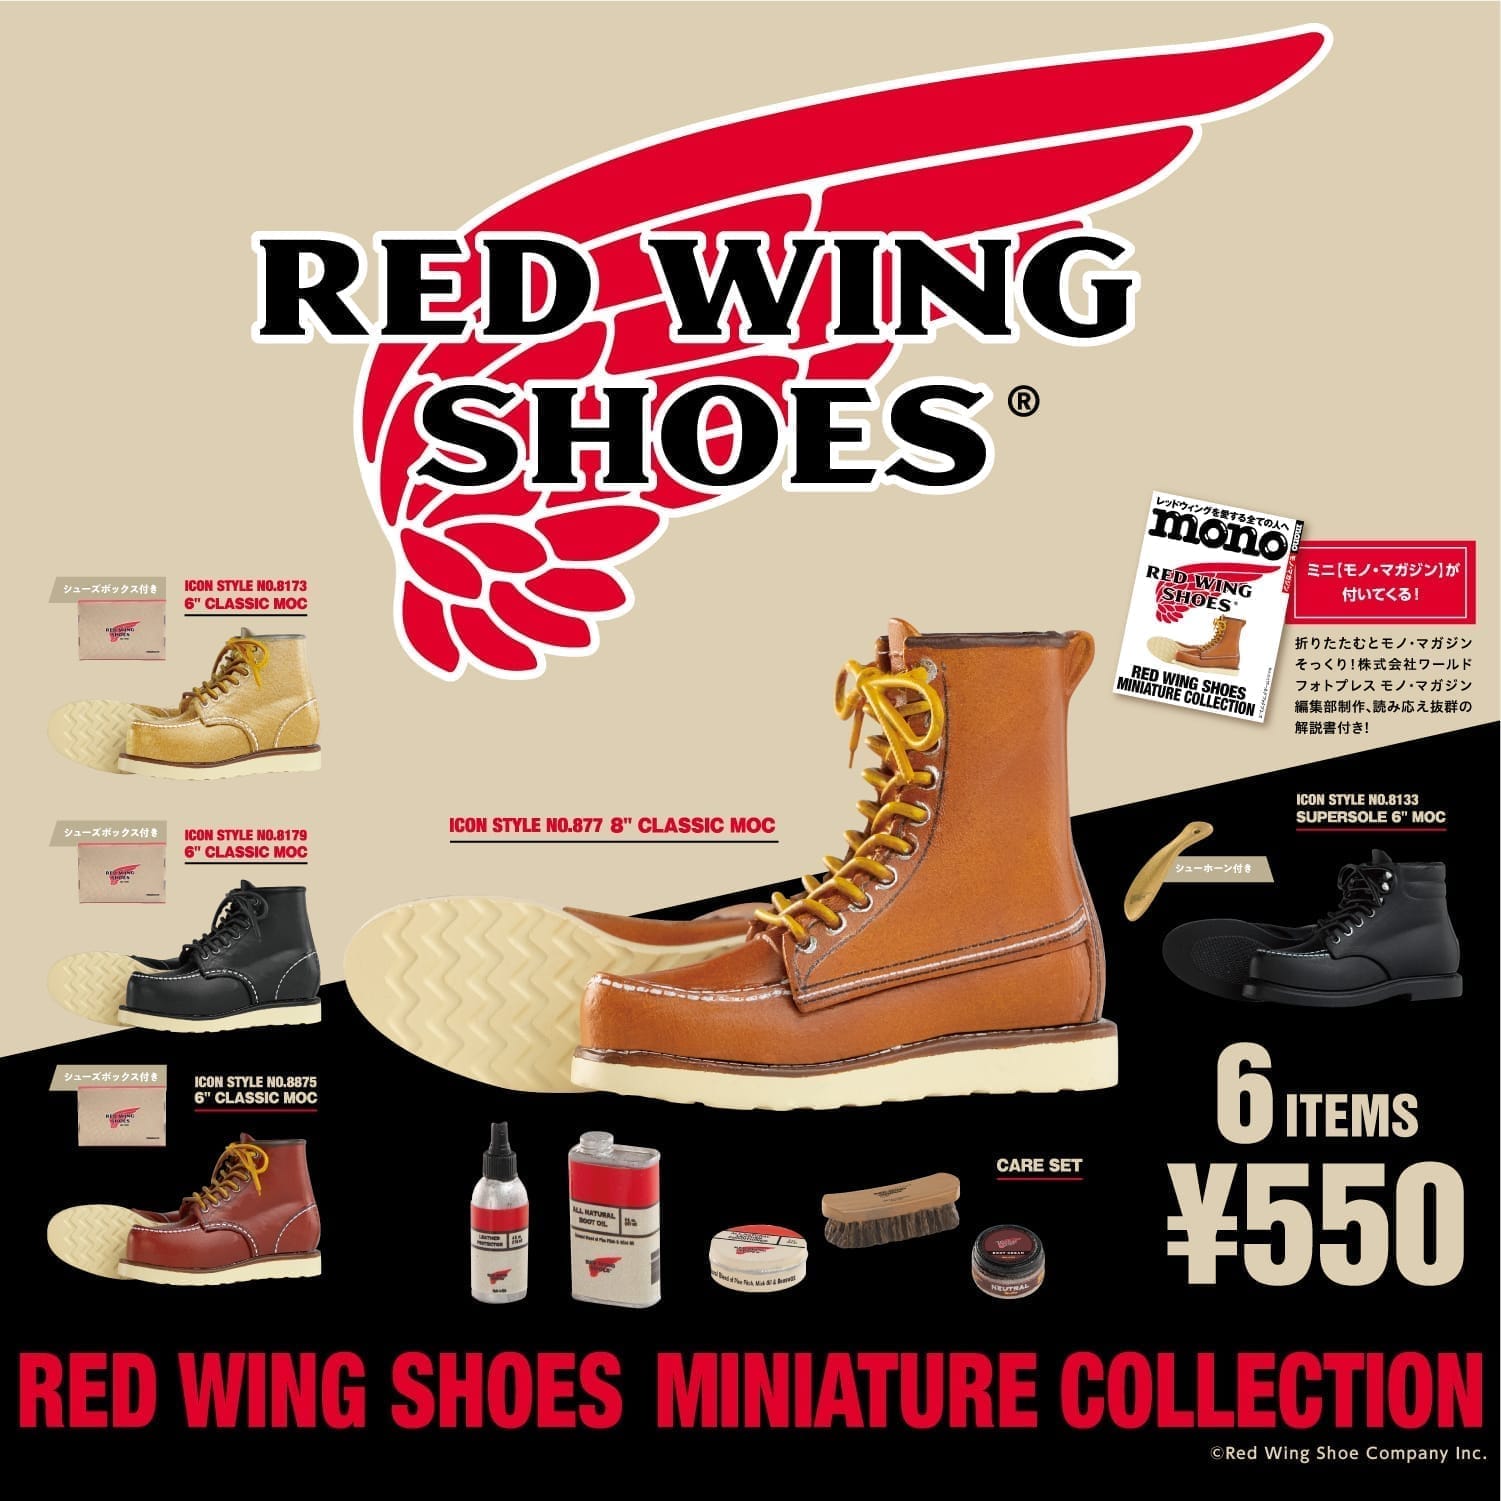 RED WING SHOES MINIATURE COLLECTION 8個パック＋公式EC限定ダイカットステッカー1枚